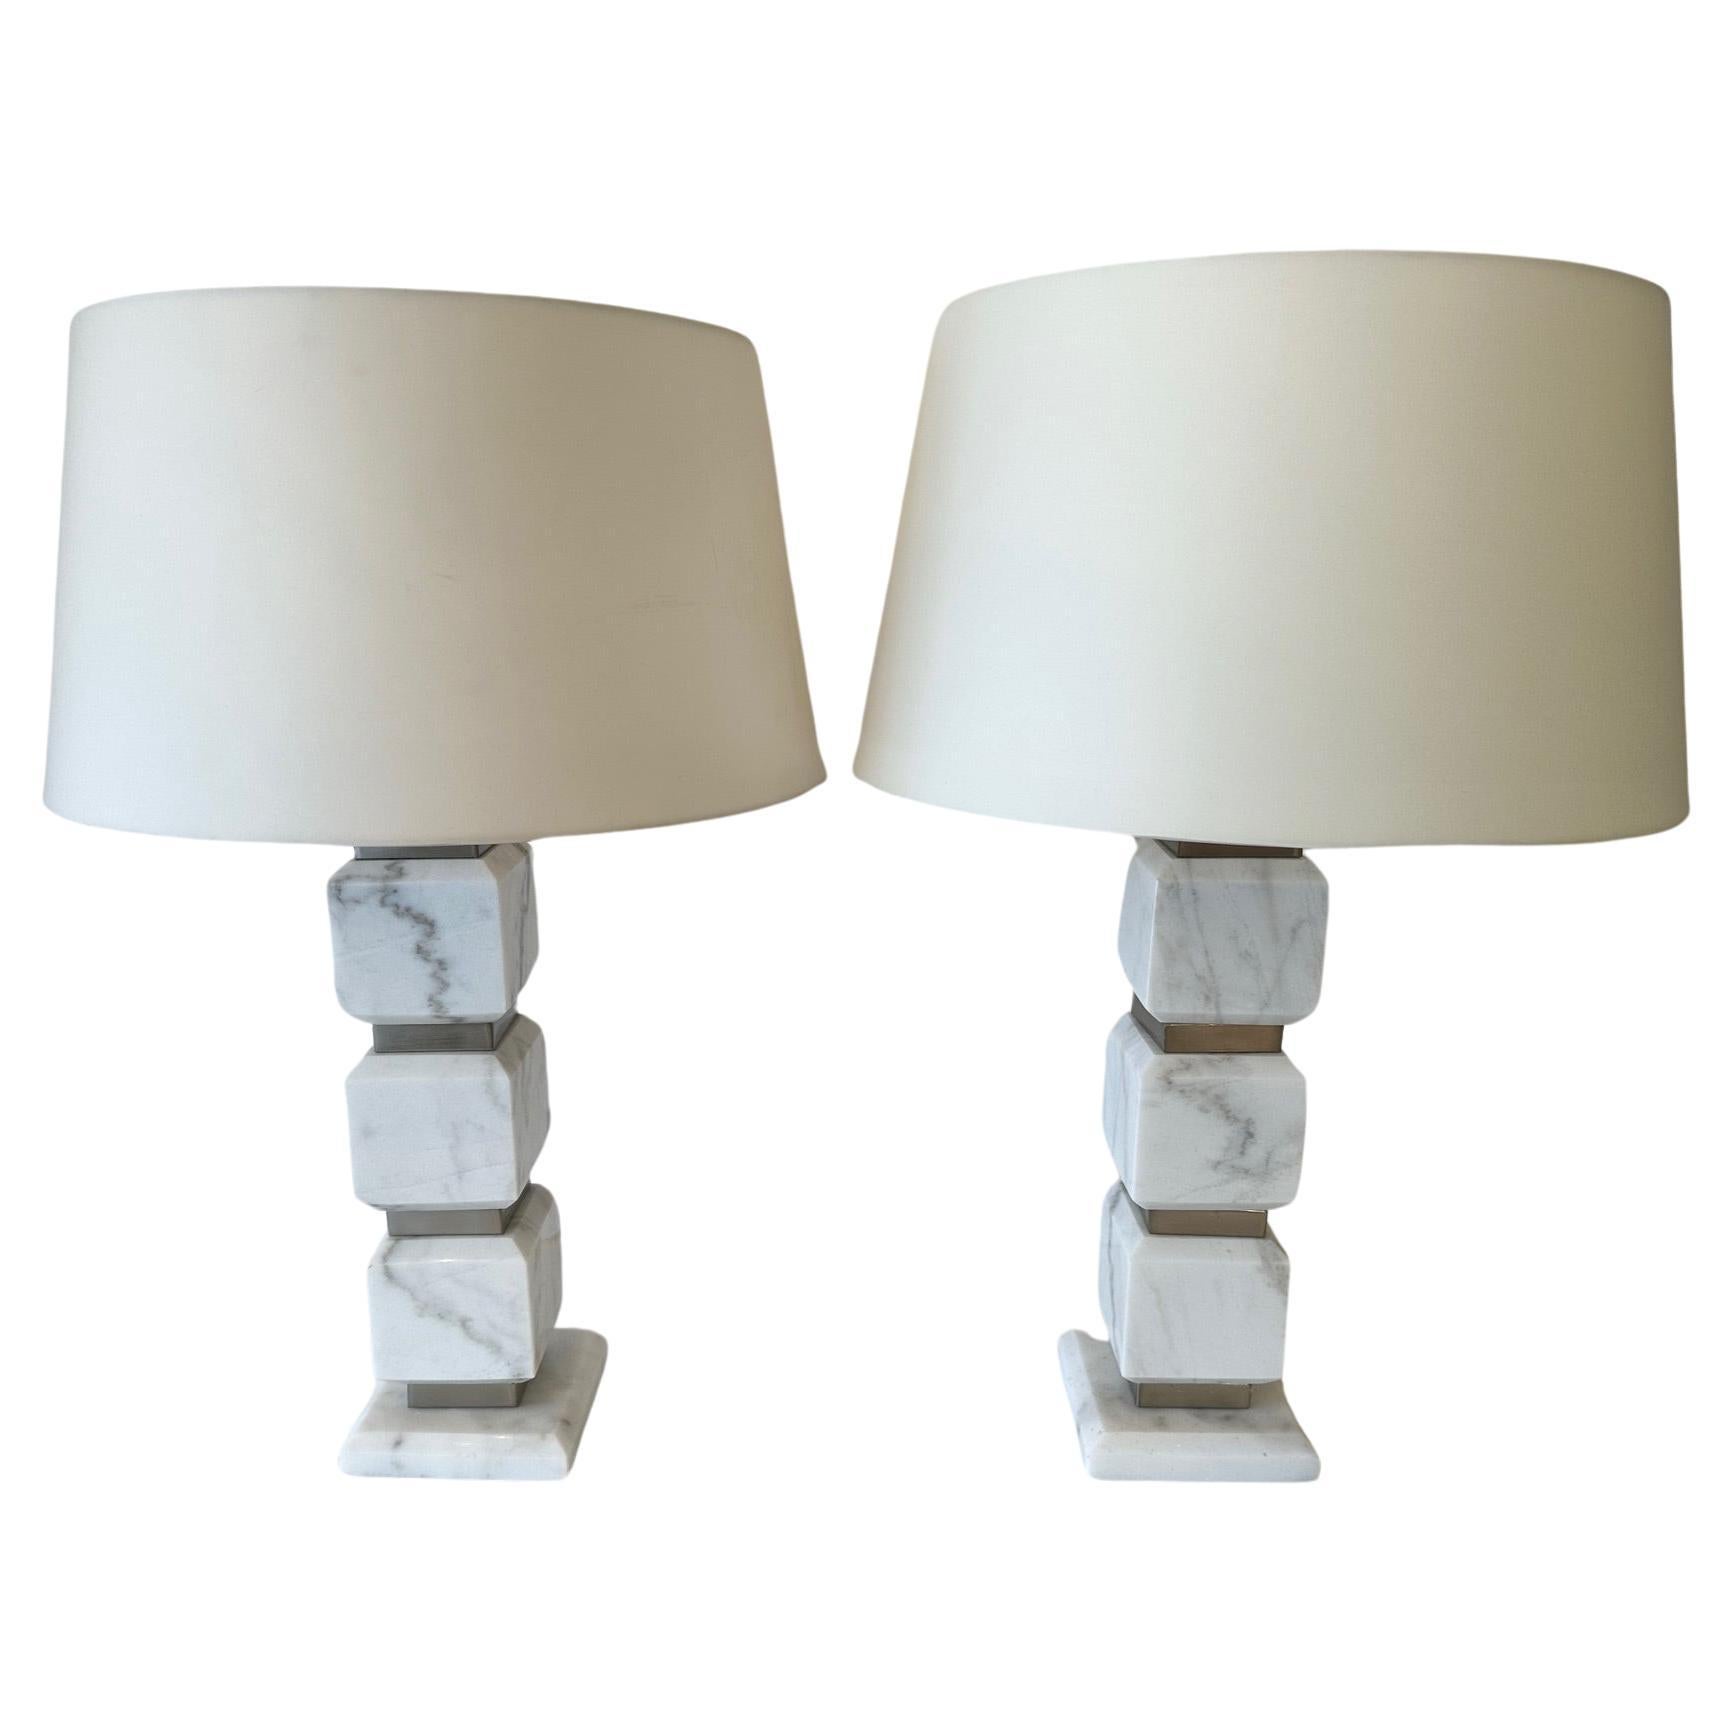 Stunning Modern Pair of Marble & Stainless Steel Cube Table Lamps For Sale